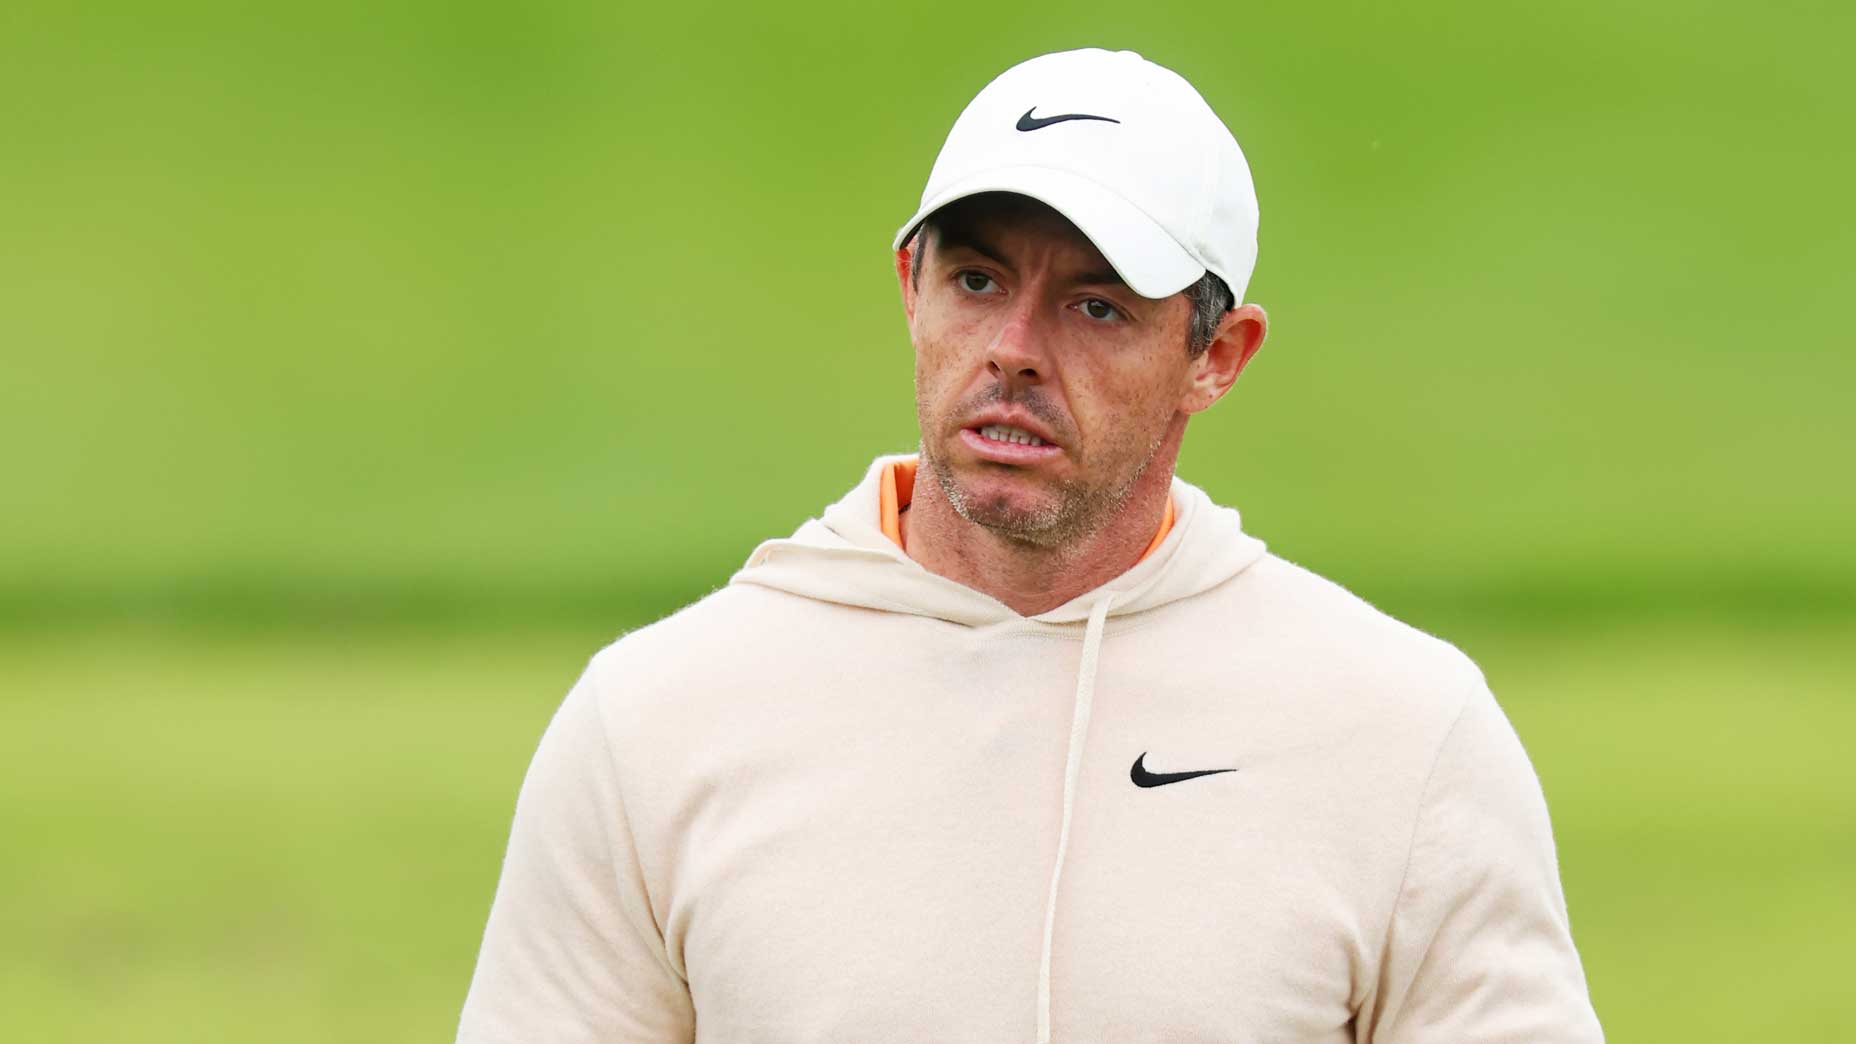 At this PGA, every conversation starts with one man: Rory McIlroy